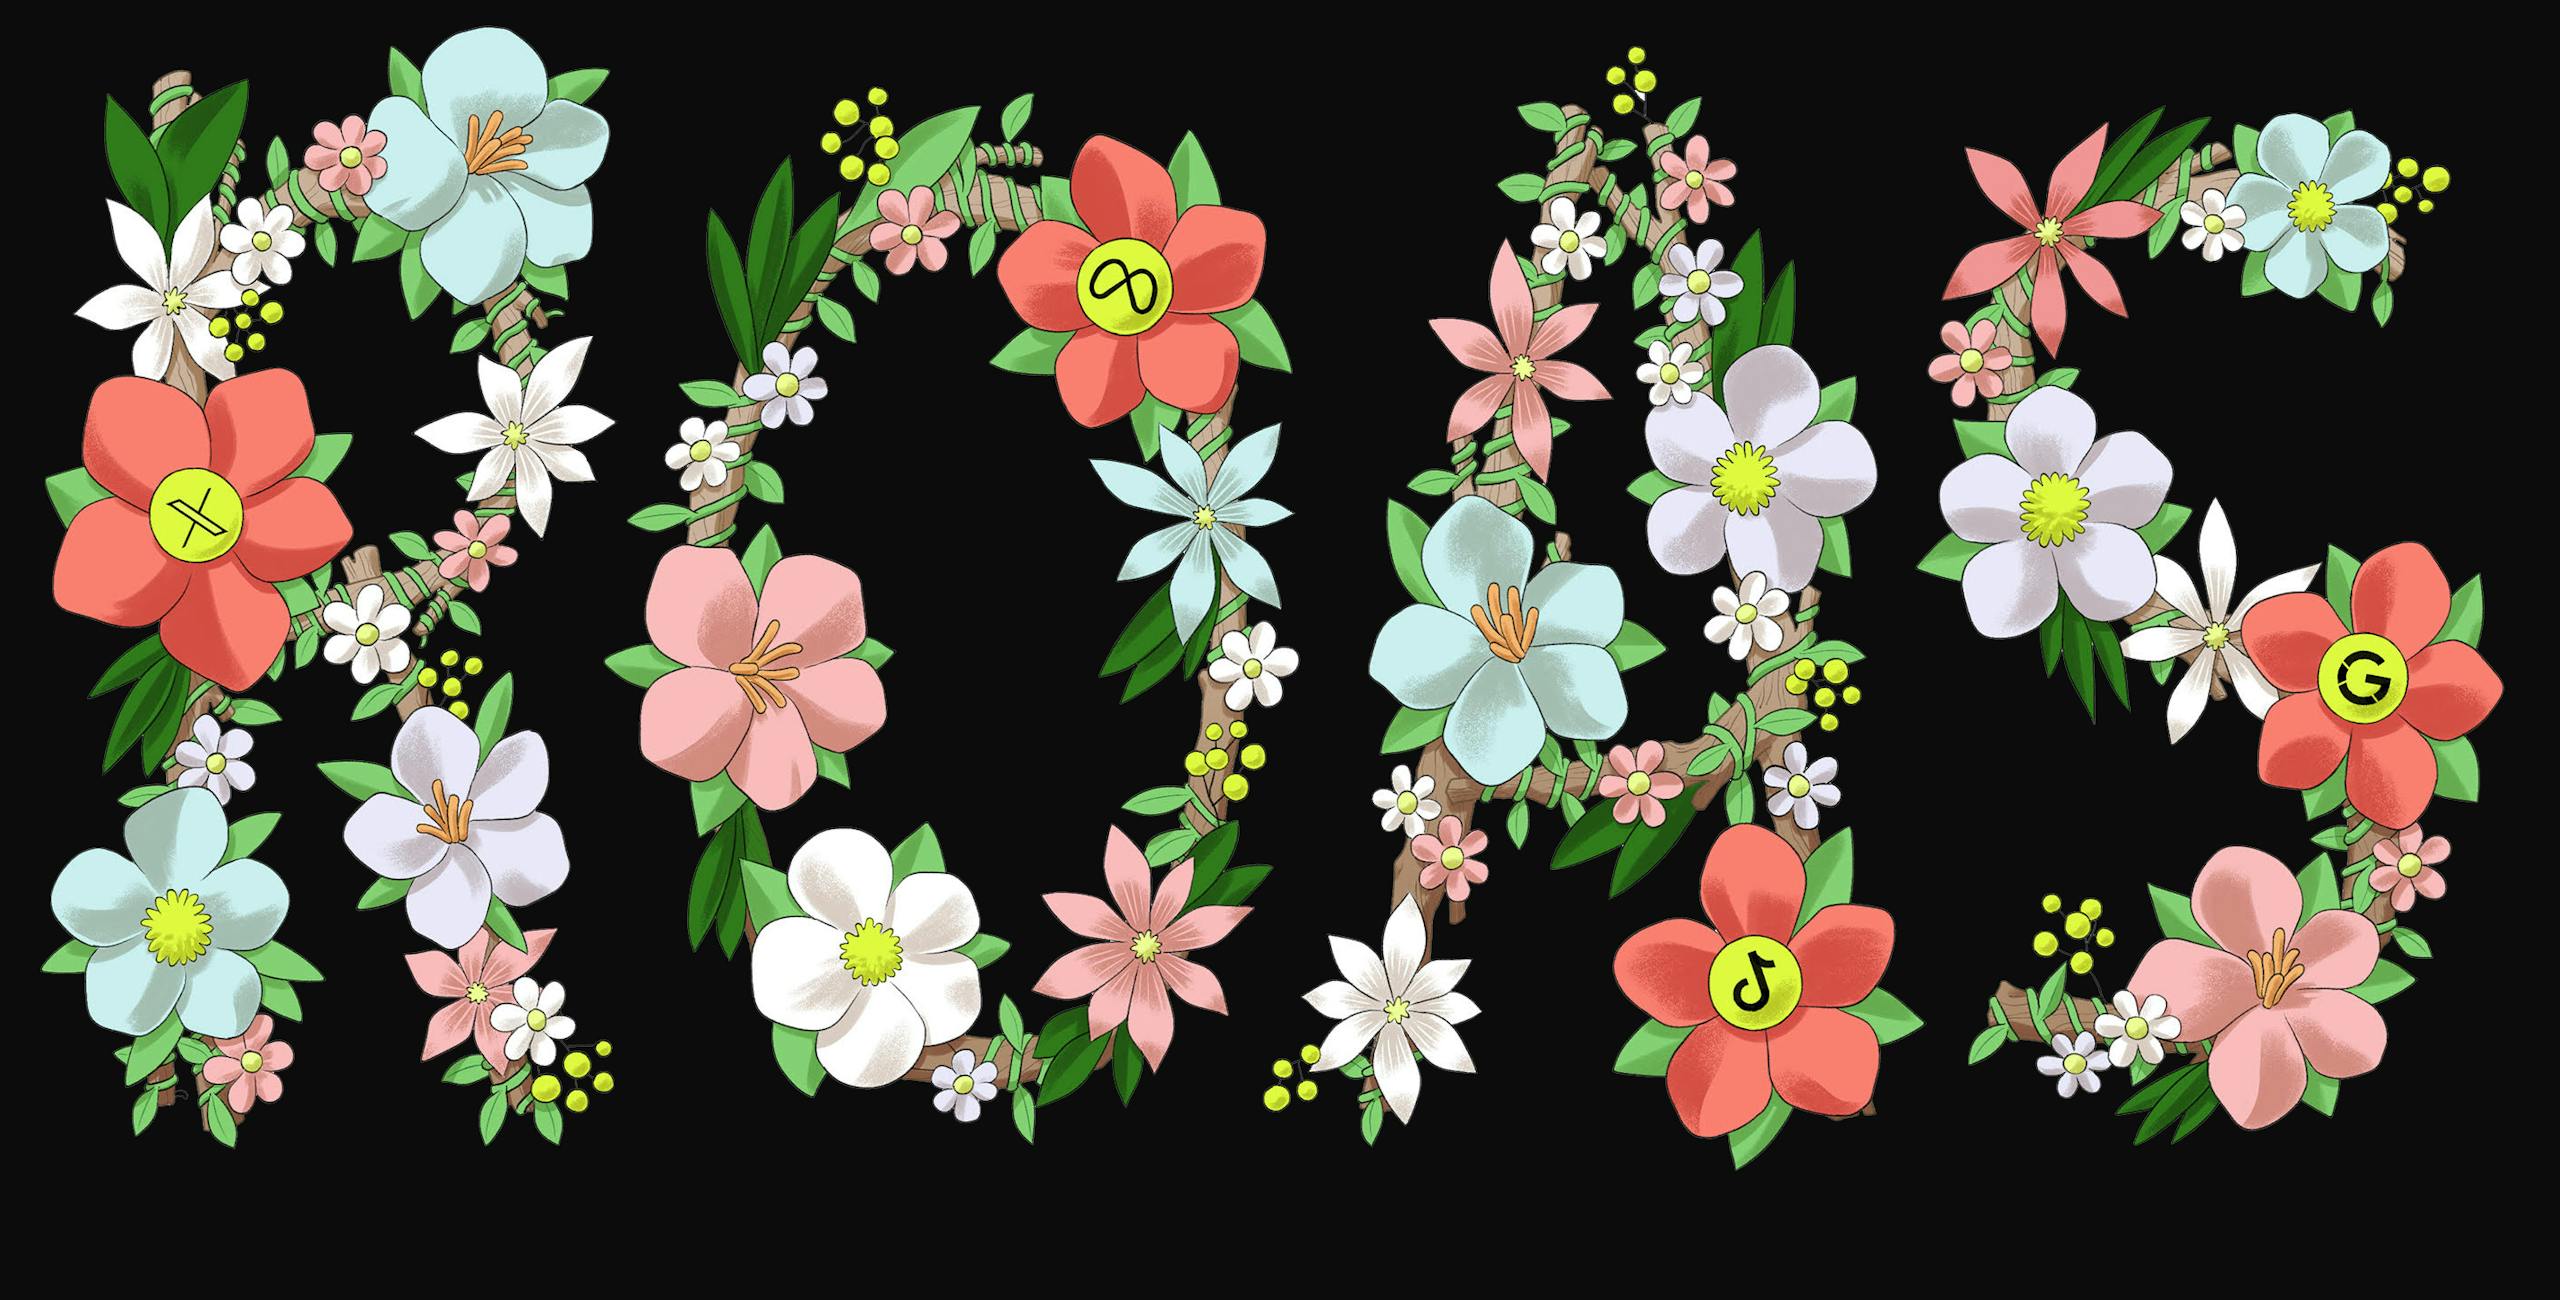 Illustration of colorful floral blooms forming the word "ROAS".